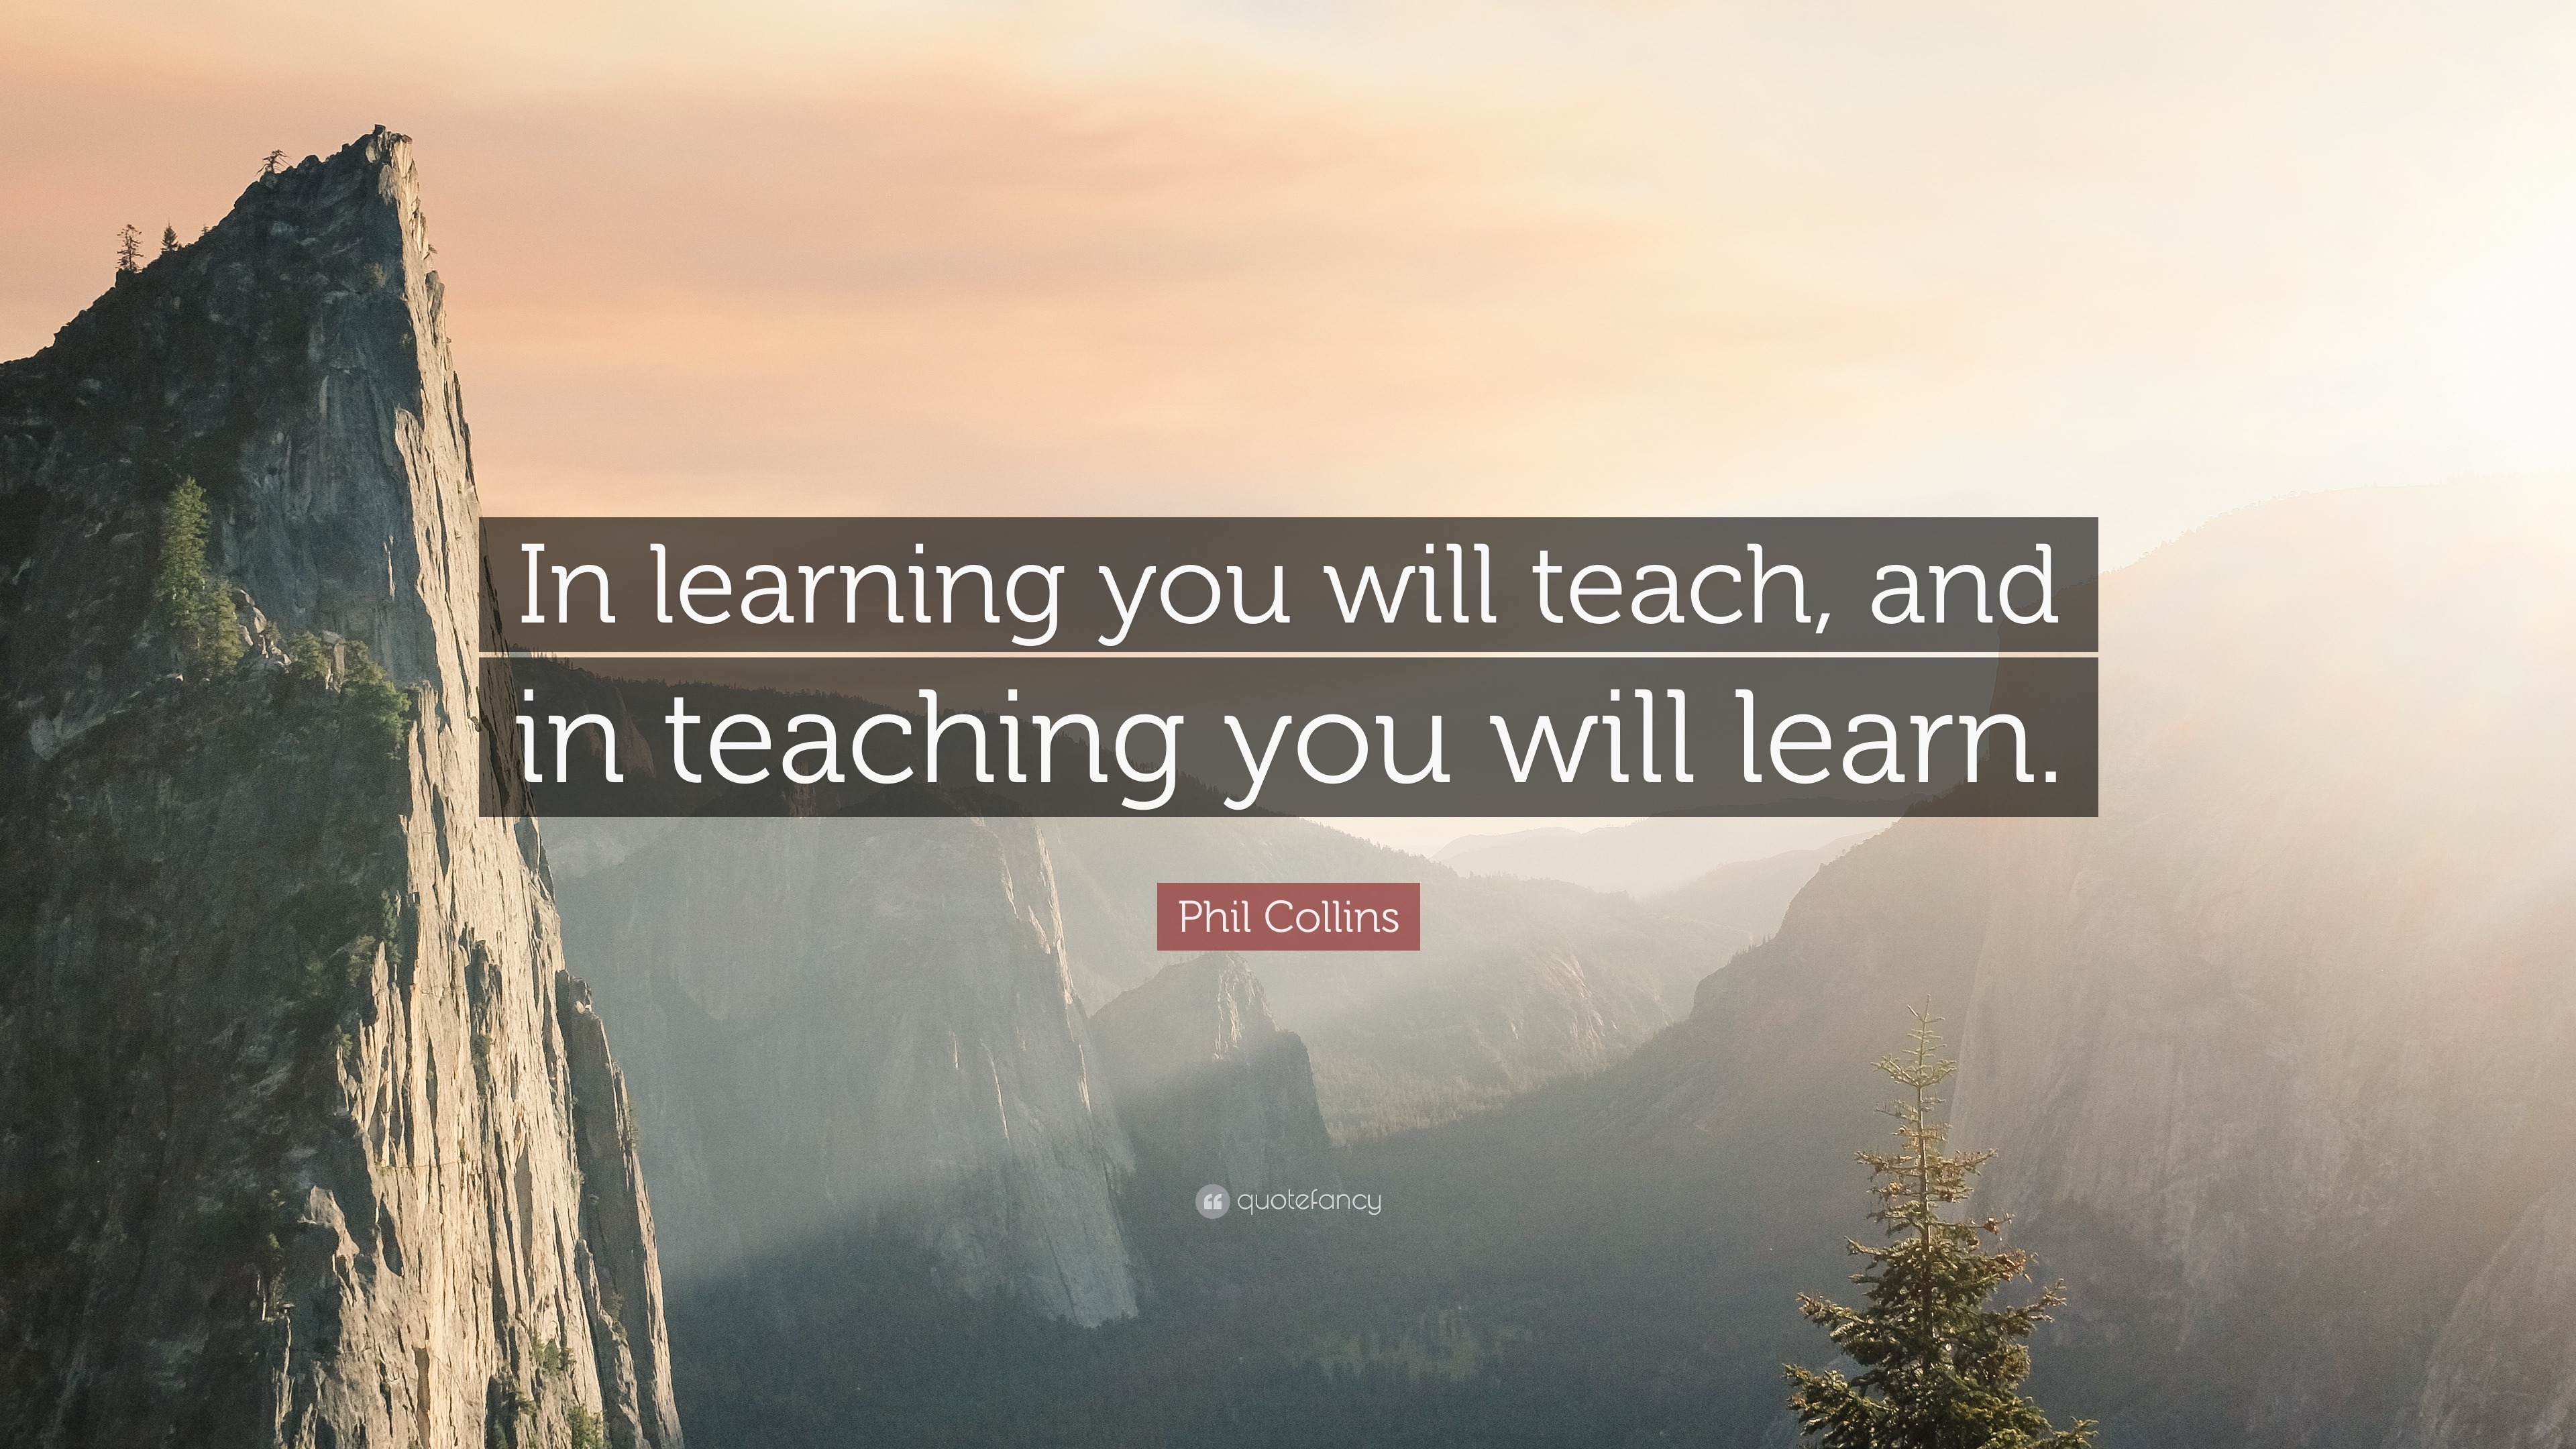 phil-collins-quote-in-learning-you-will-teach-and-in-teaching-you-will-learn